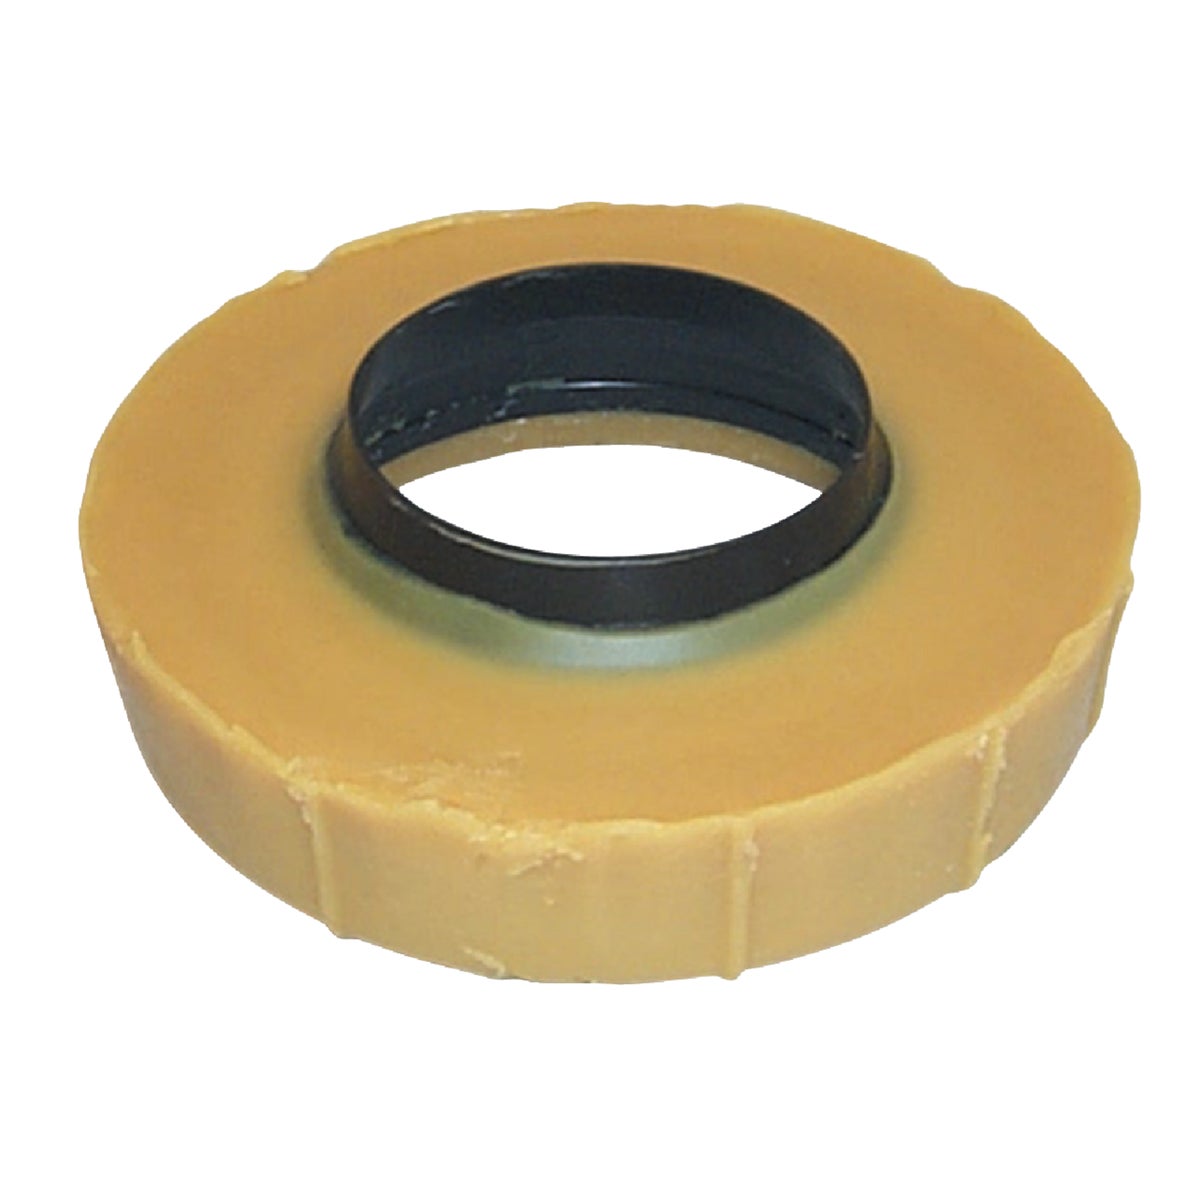 Item 445142, Extra thick wax gasket for problem areas that require more wax.